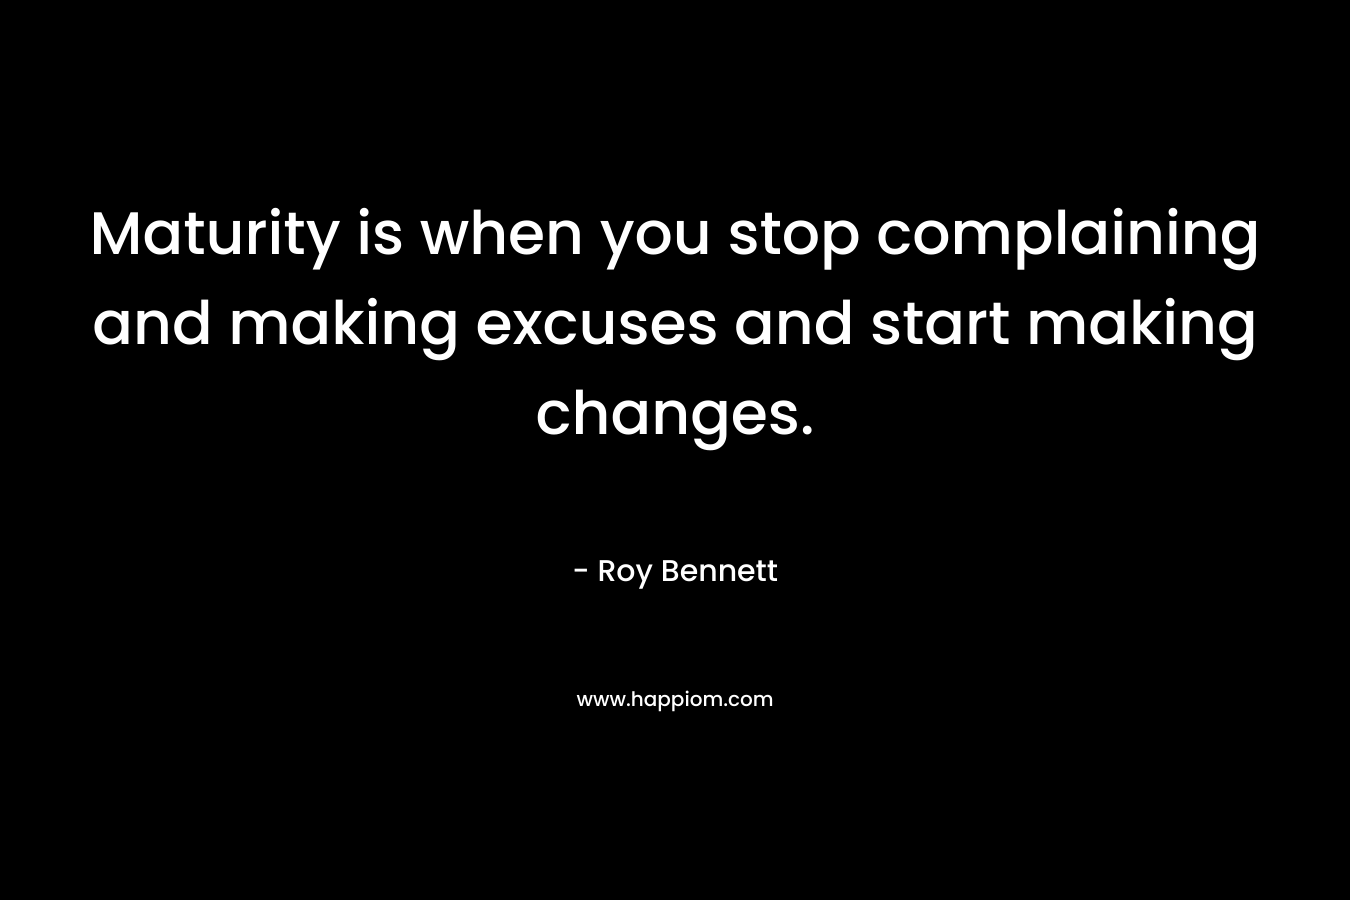 Maturity is when you stop complaining and making excuses and start making changes.